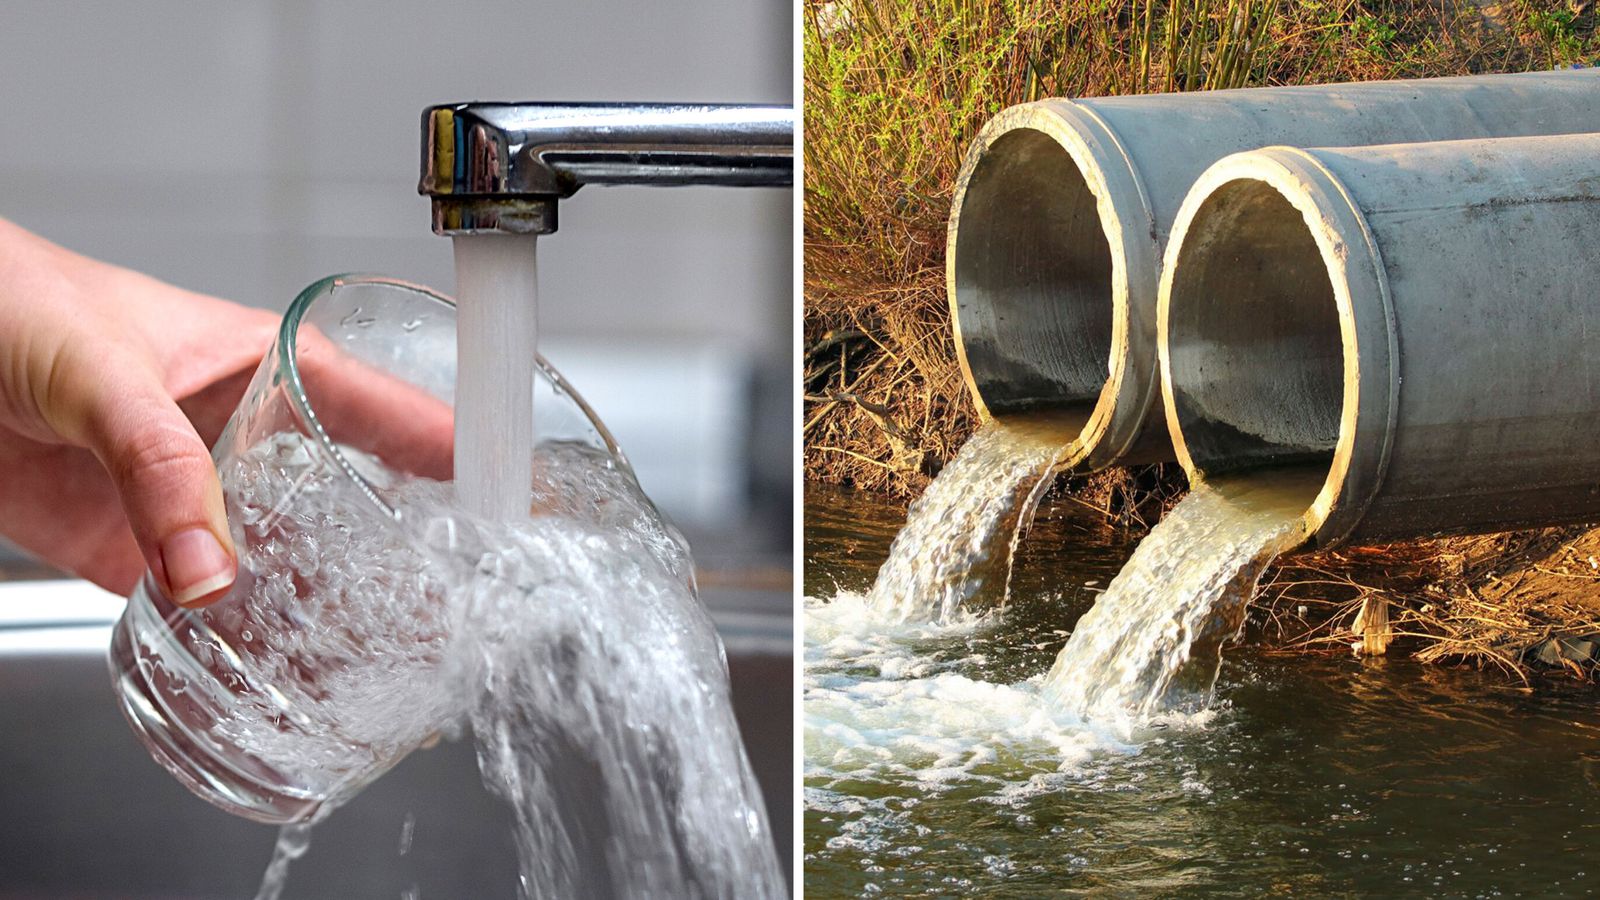 'Increase in water bills' to pay for £10bn investment, says industry chief 